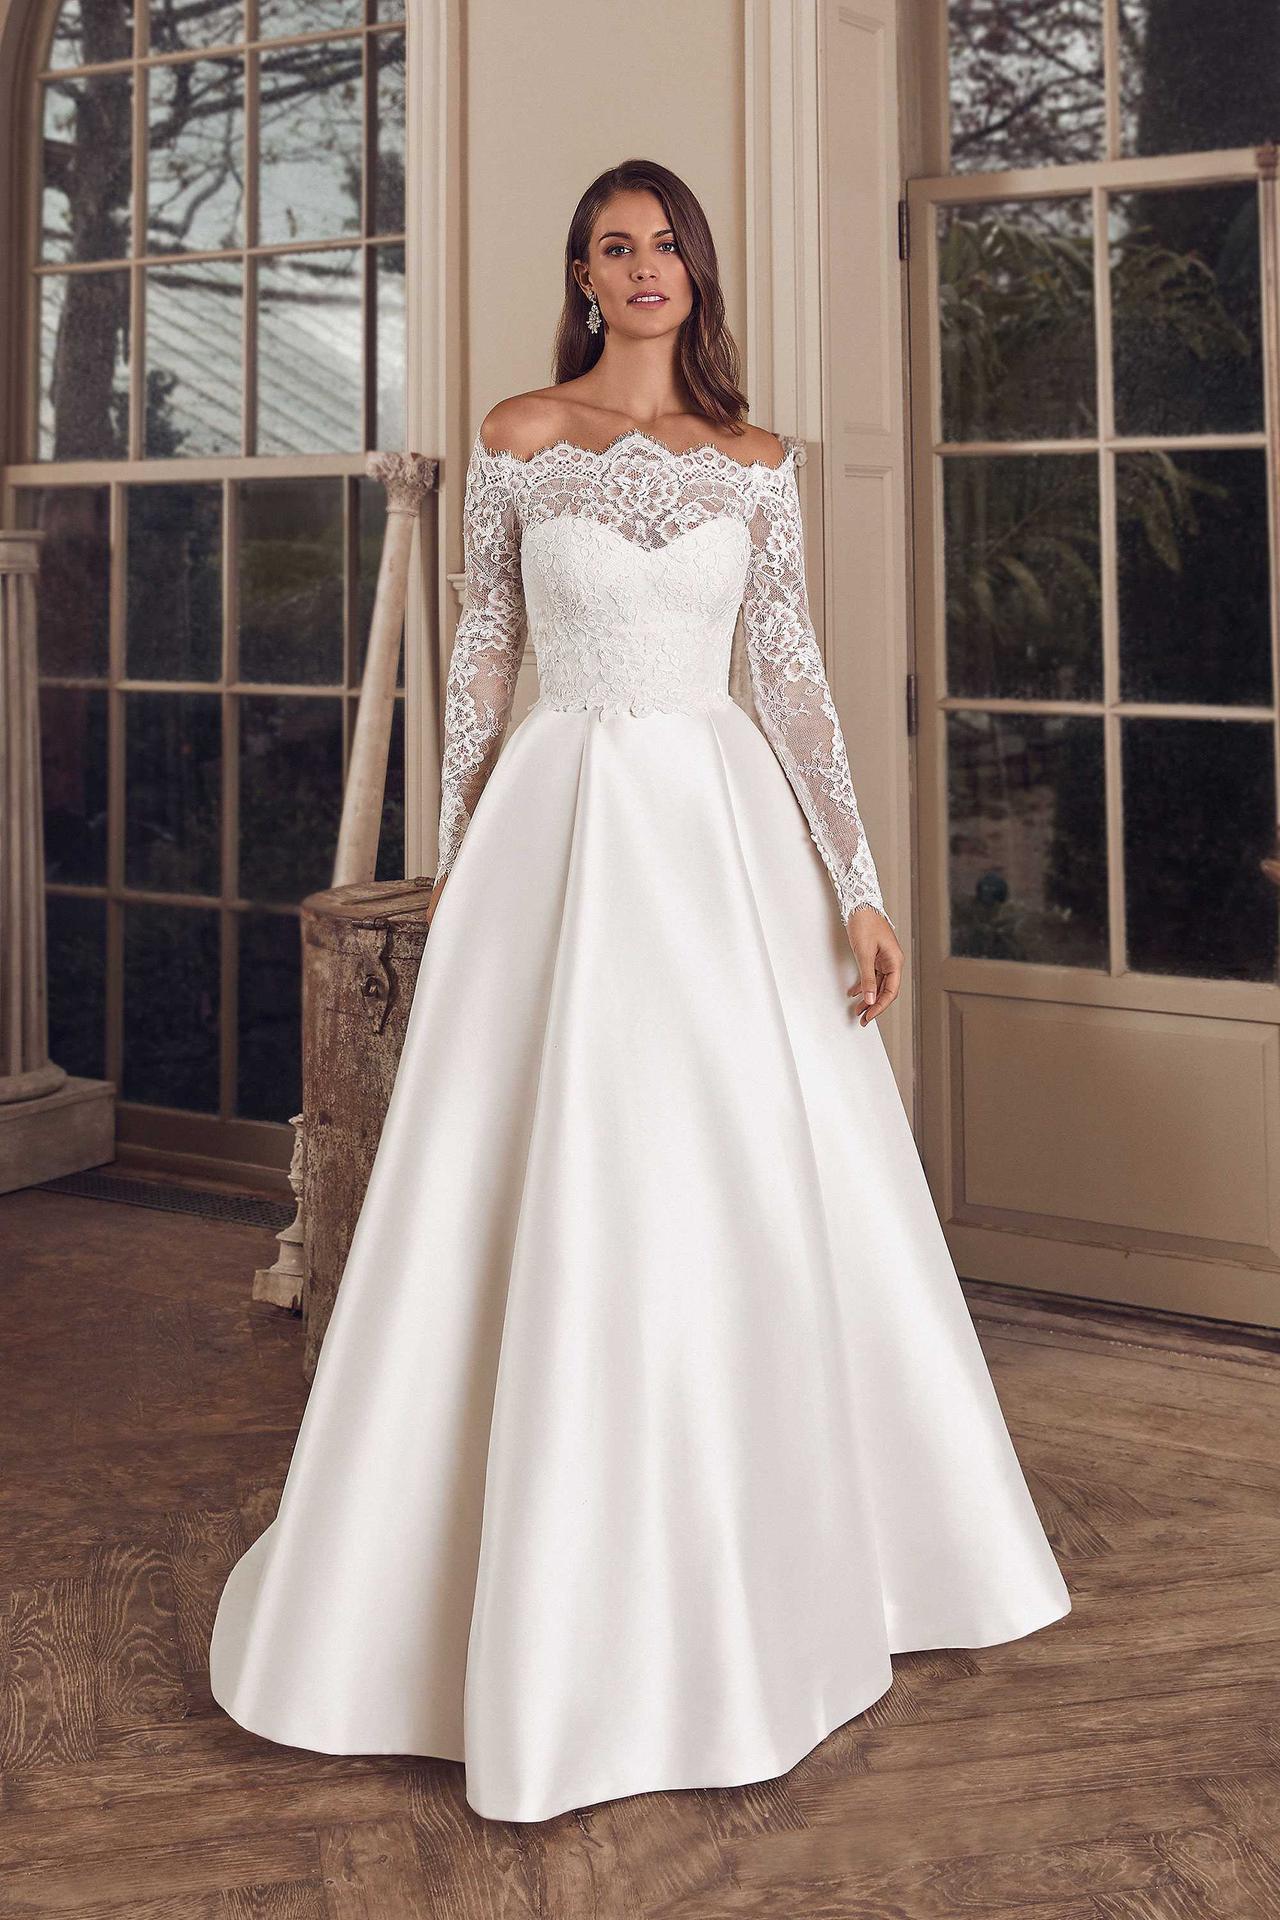 Best Style Wedding Dresses For Large Busts